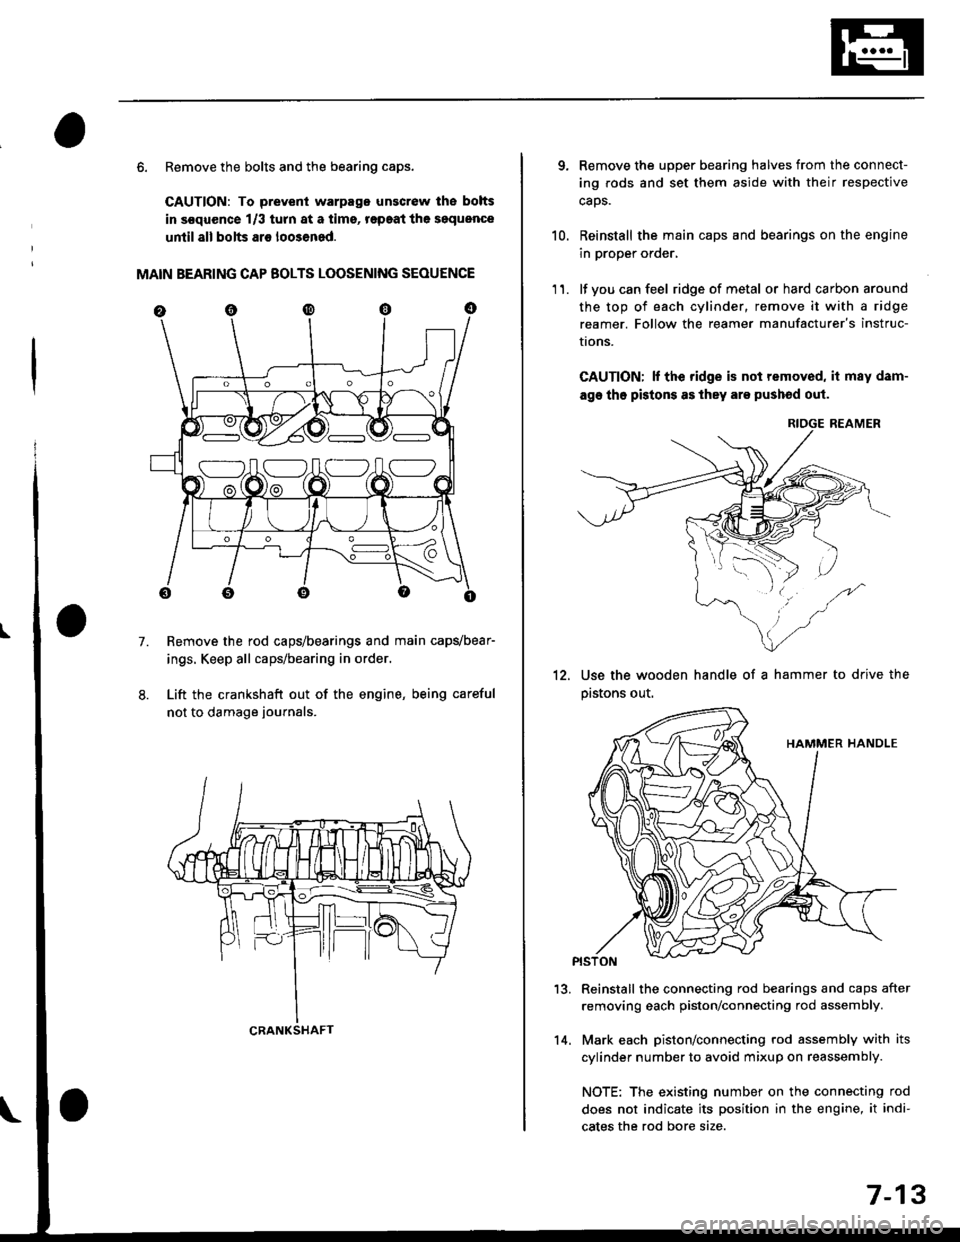 HONDA CIVIC 1997 6.G Workshop Manual 6. Remove the bolts and the bearing caps.
CAUTION: To prevenl warpago unscrow lhe bolts
in s€quence 1/3 turn at a tims, r€paat the soquence
until all bolts ar€ loo3ened.
MAIN BEARING CAP BOLTS L